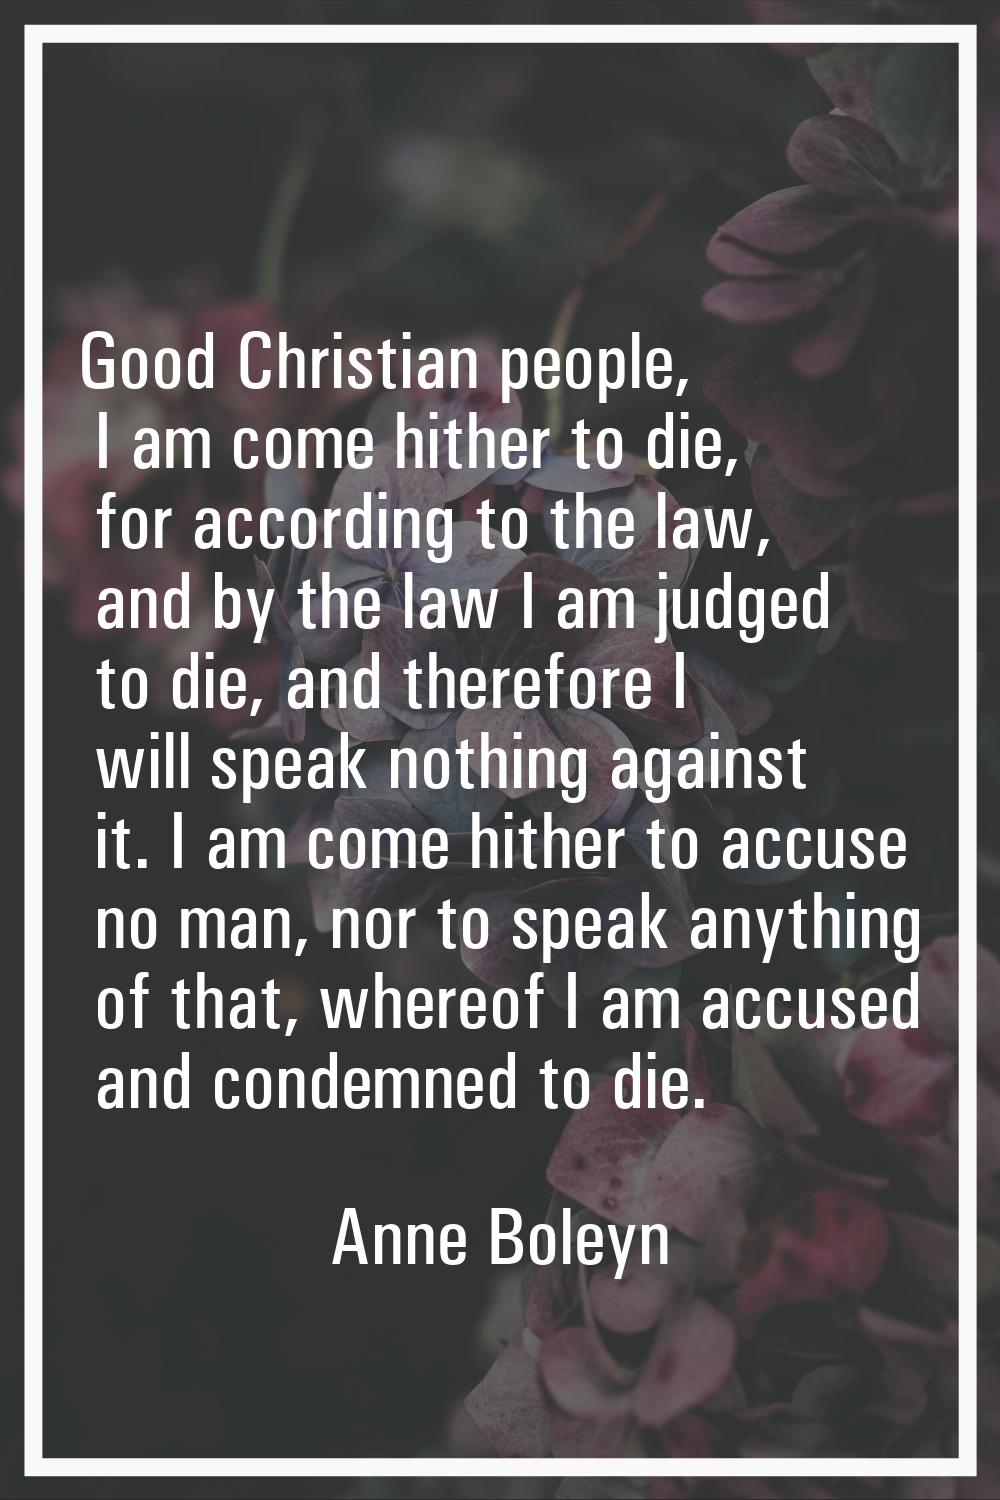 Good Christian people, I am come hither to die, for according to the law, and by the law I am judge